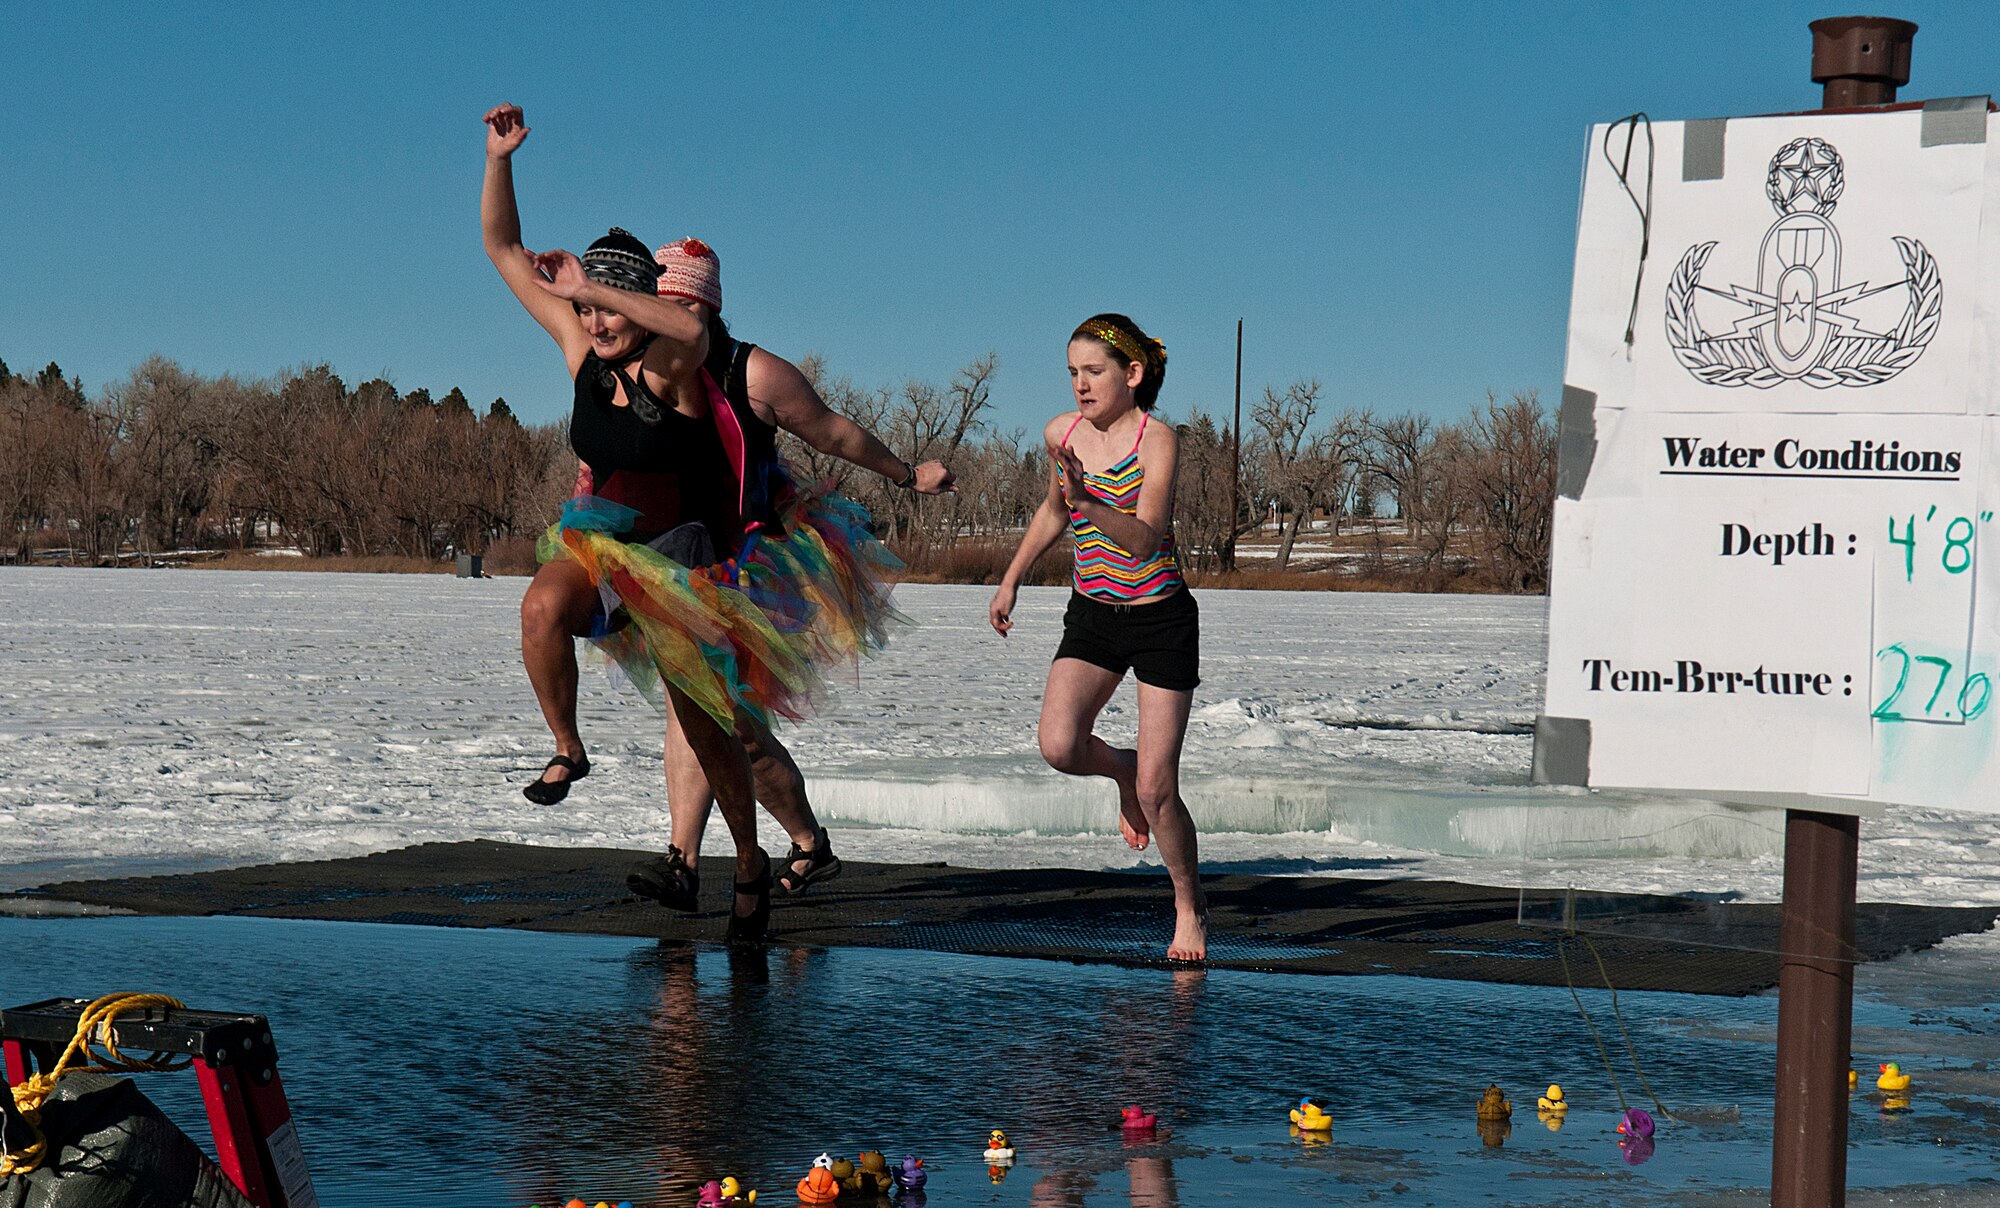 Polar plungers raise money for Wounded EOD Warrior Foundation in a